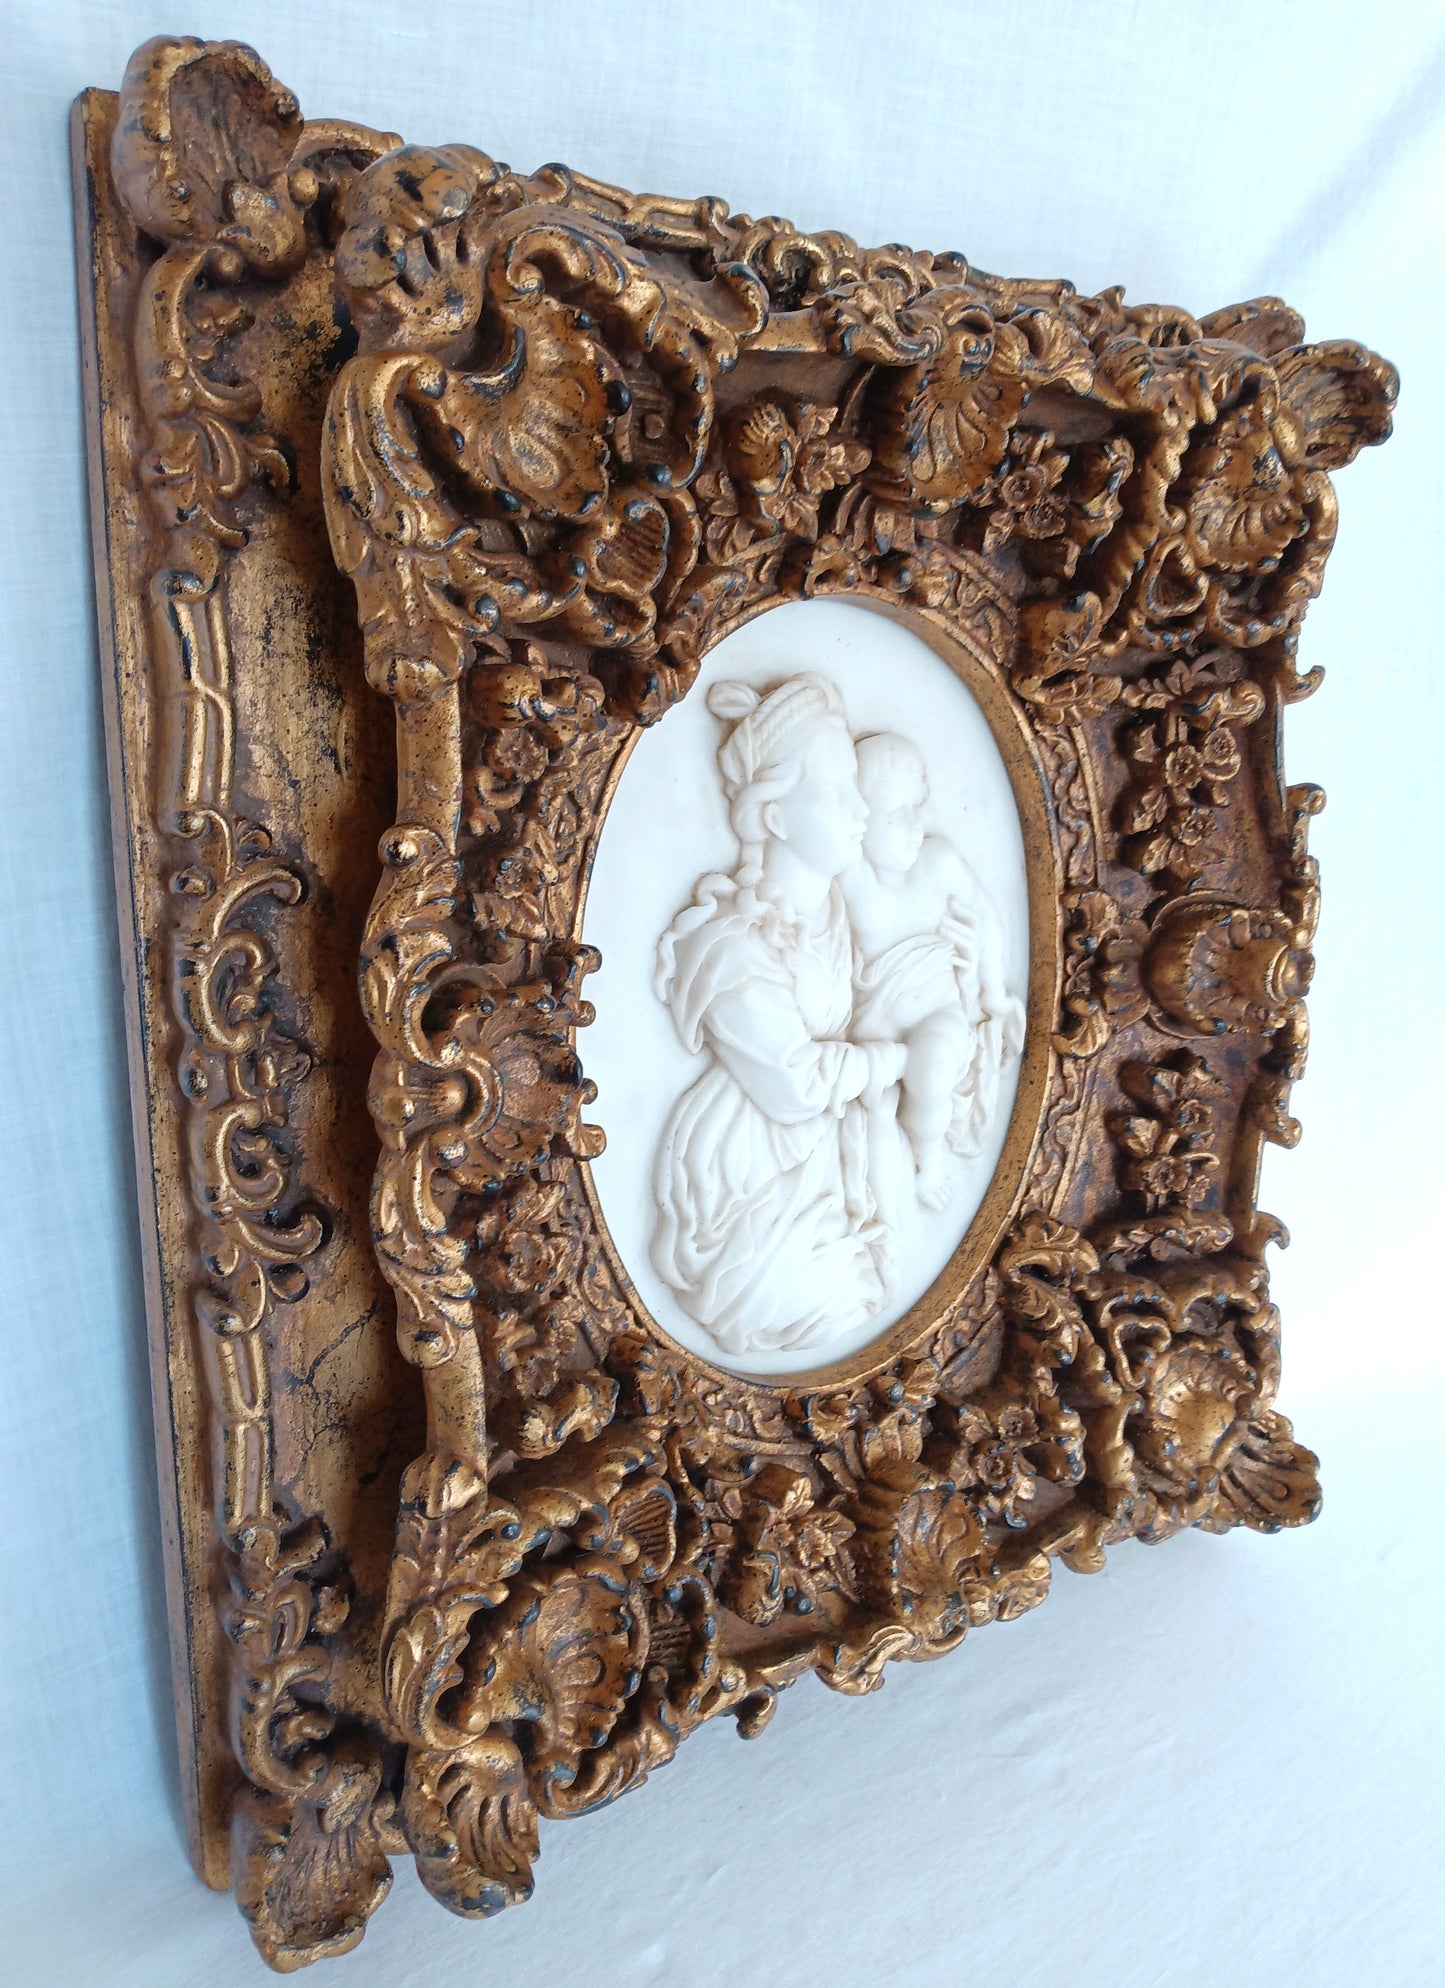 Vintage Neoclassical Reproduction Oval Marble Sculpture Madonna and Child Framed in Gilded Carved Wood Ornate Frame Wall Art